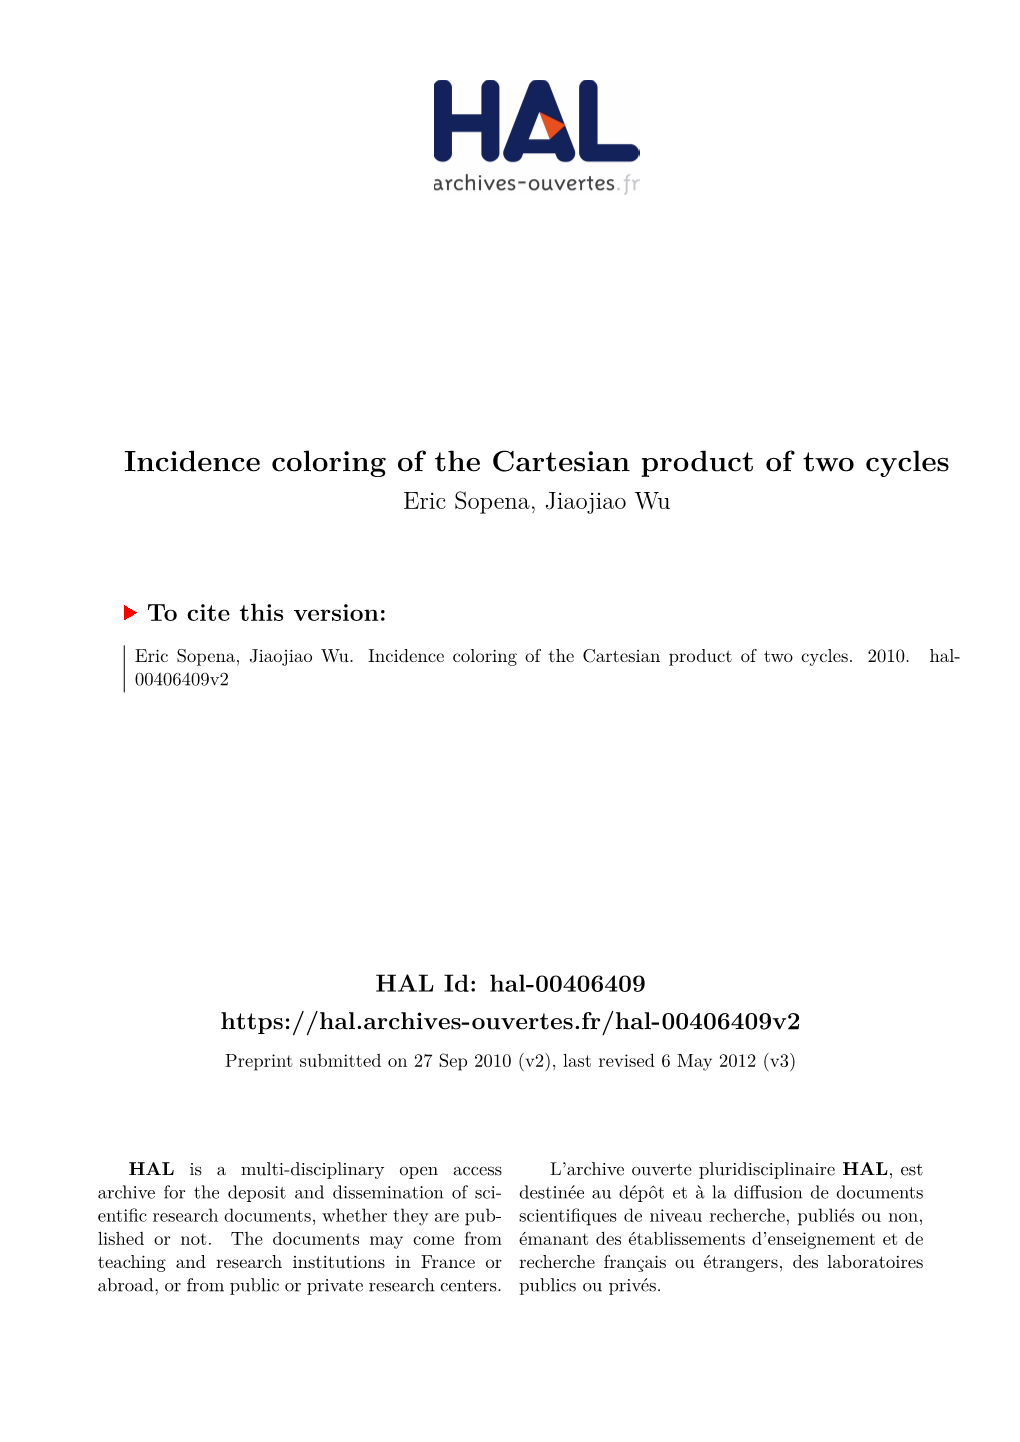 Incidence Coloring of the Cartesian Product of Two Cycles Eric Sopena, Jiaojiao Wu